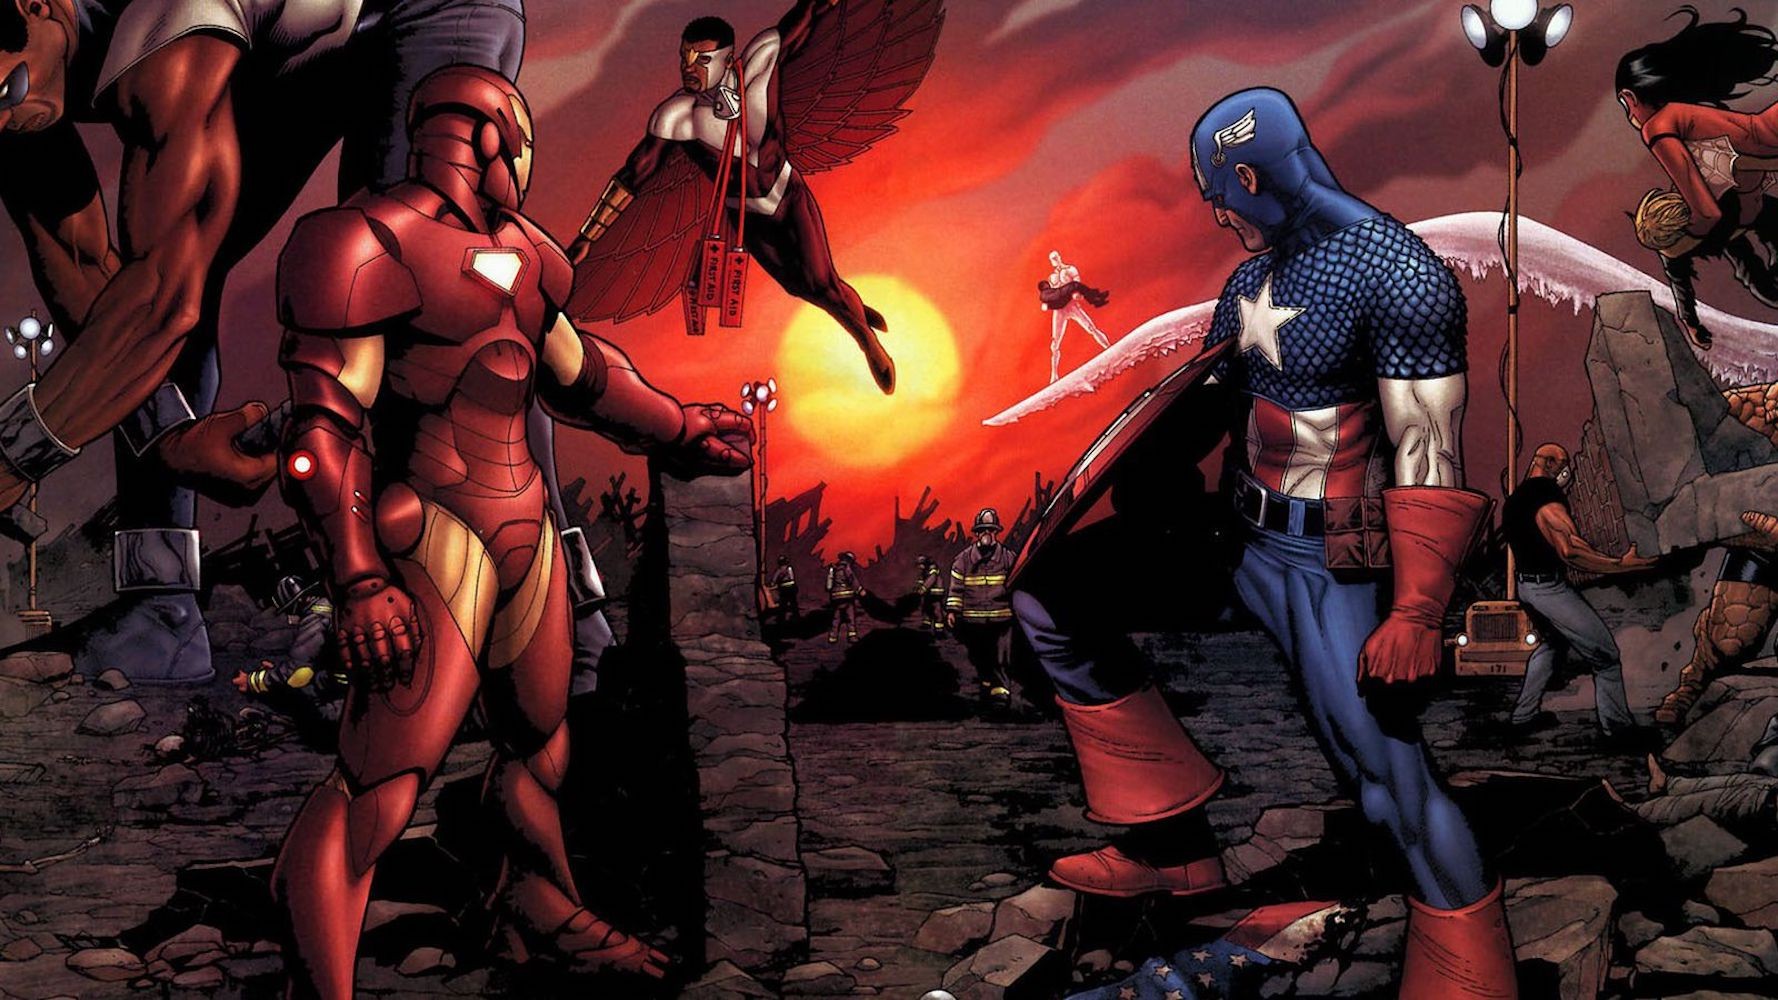 Secret Invasion is a step in Marvel's decade of transition